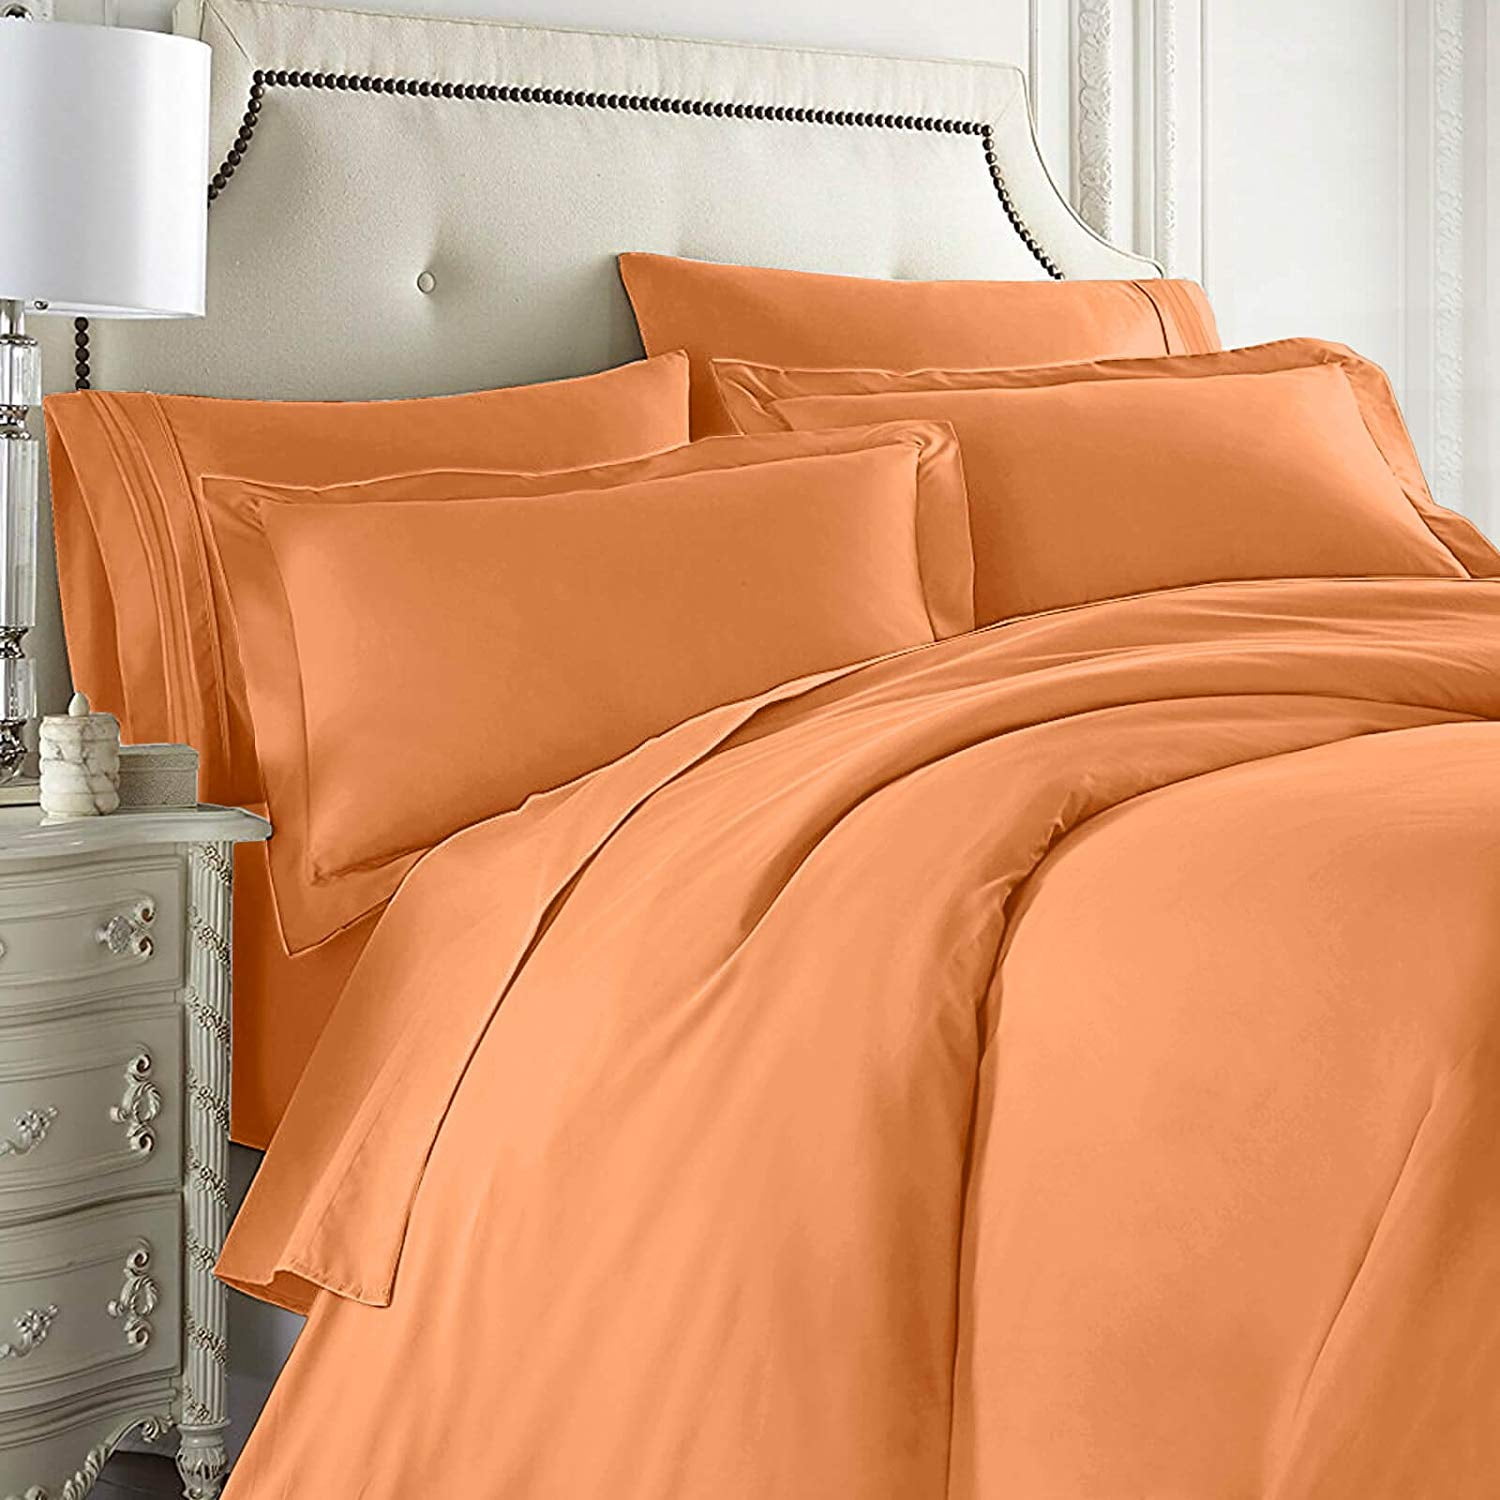 Nestl Bedding 7-Piece Queen Duvet Cover and Bed Sheet Set - Includes Duvet Cover, Flat Sheet, Fitted Sheets, 2 Pillowcases, 2 Pillow Shams - Complete Luxury Soft Microfiber Bedding Set, Apricot Orange